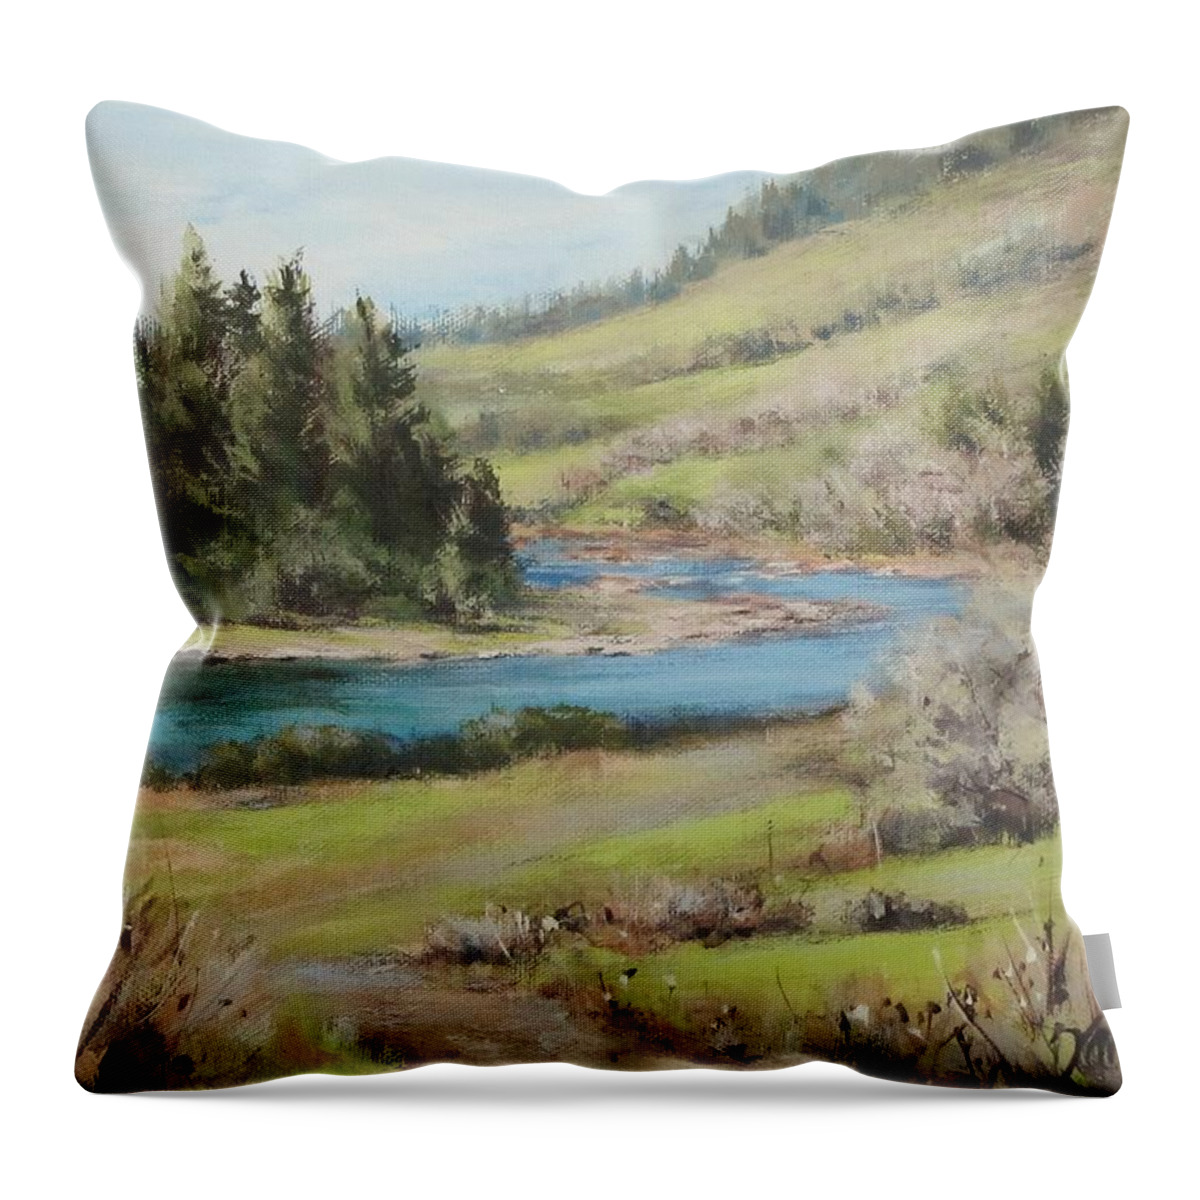 Oregon Throw Pillow featuring the painting North Bank March by Karen Ilari